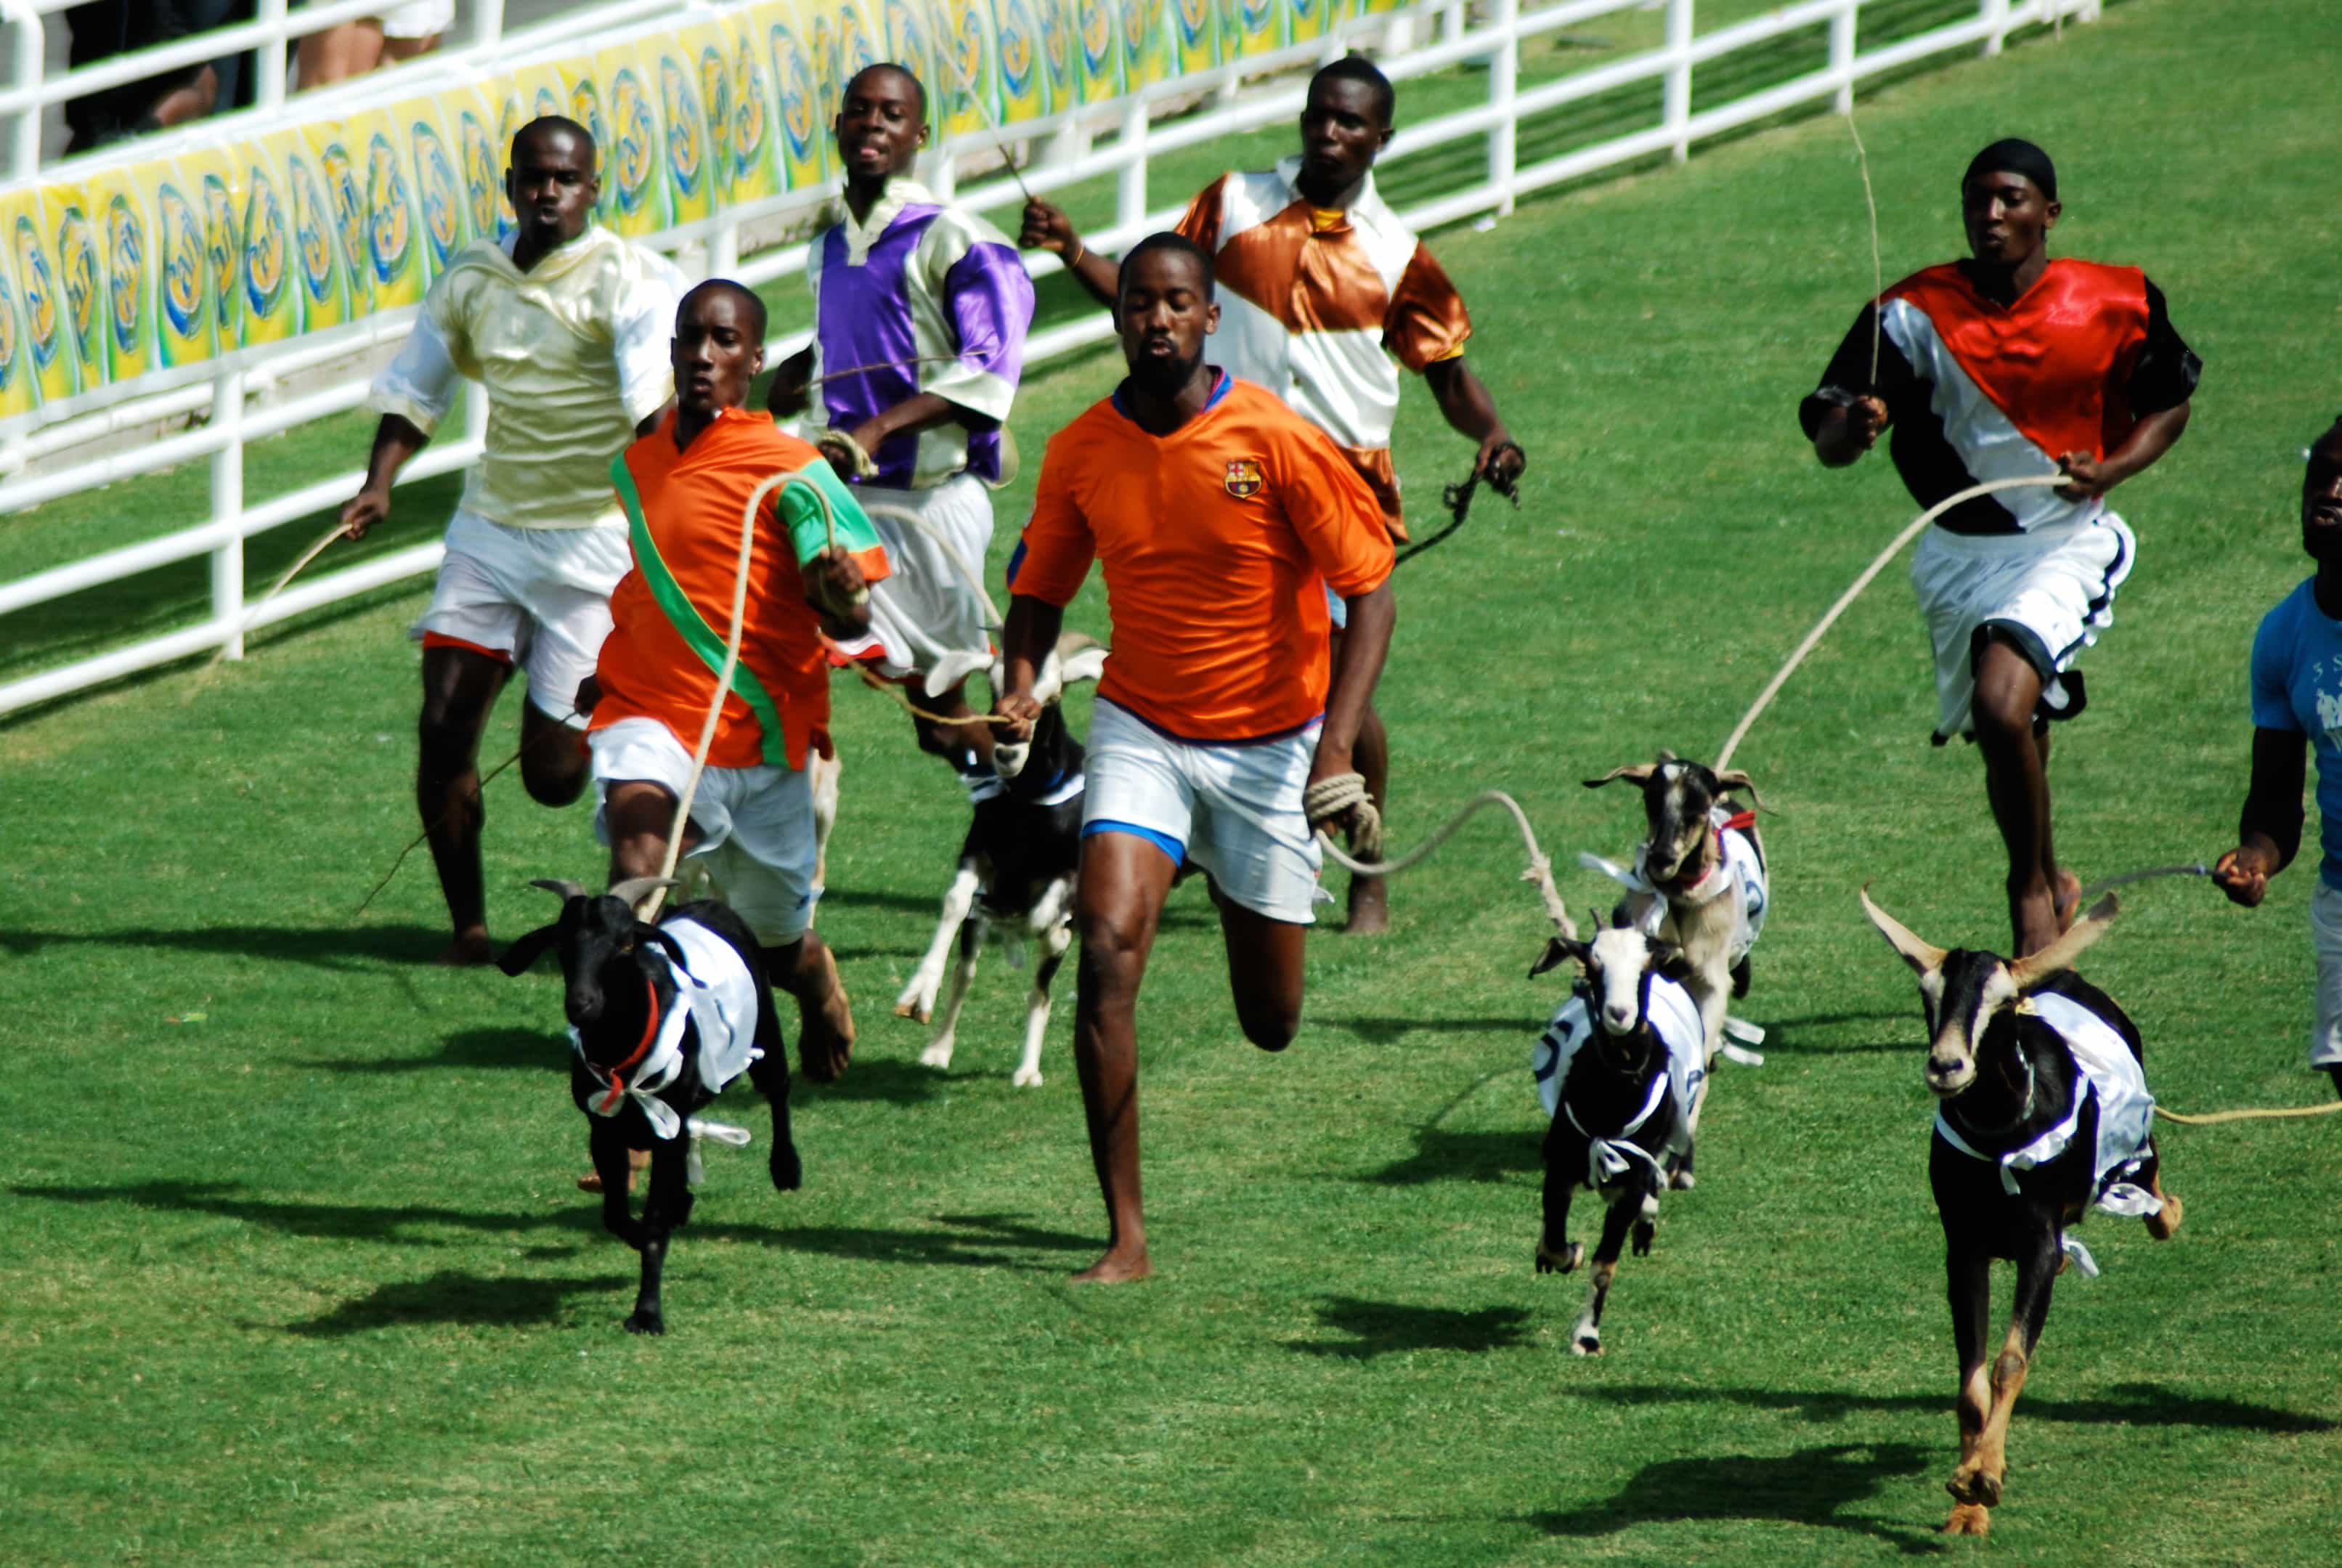 Easter Tuesday goat races, Buccoo | Credit: Flickr user Kate Nevens